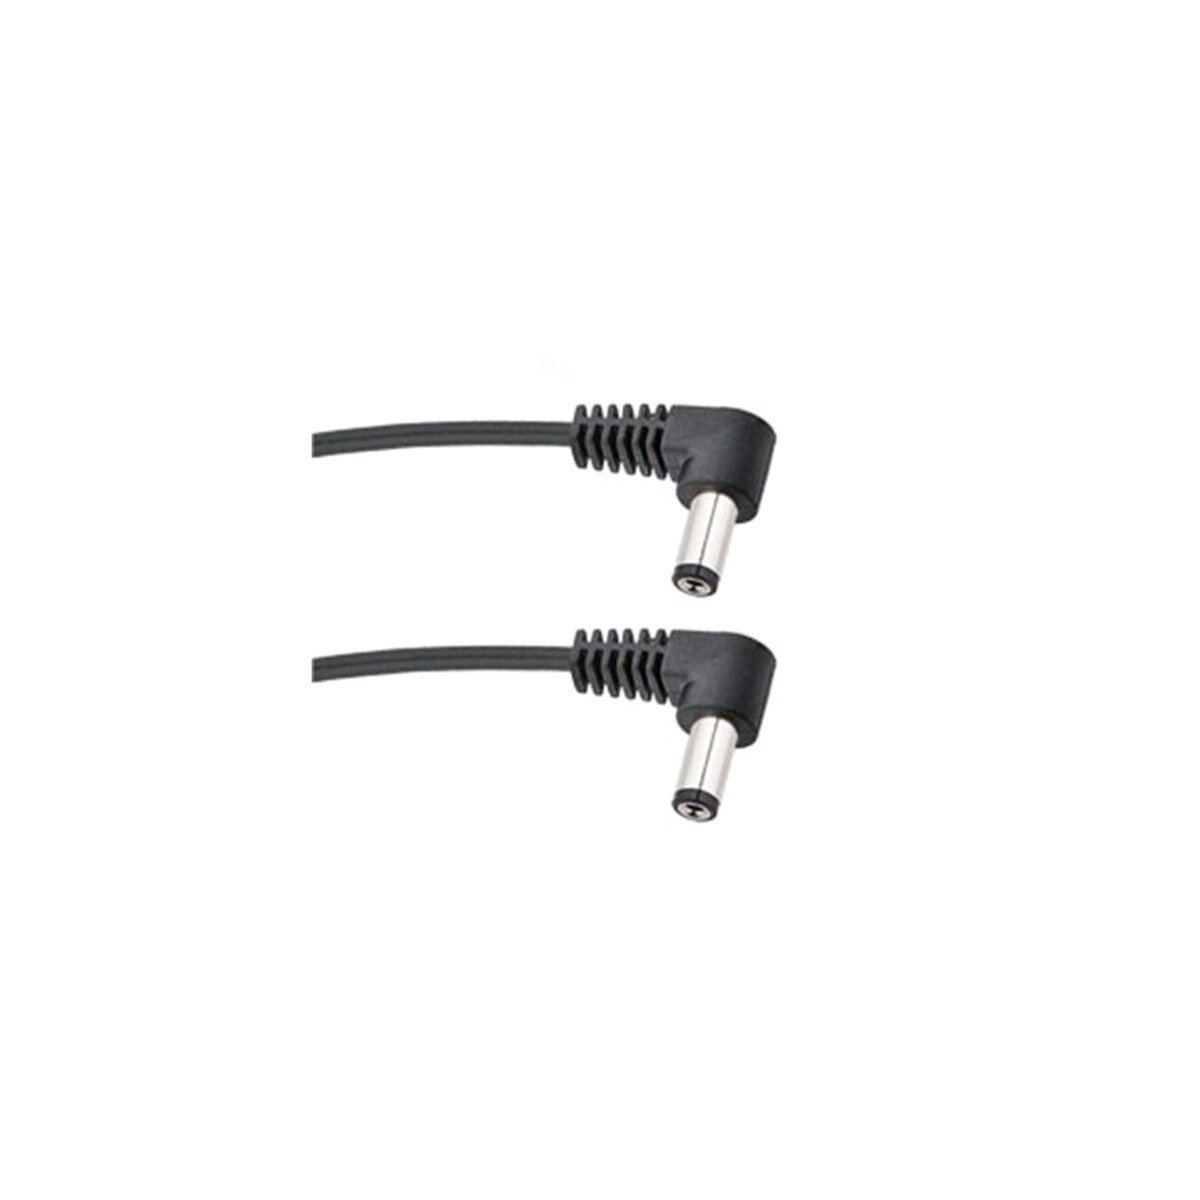 Voodoo Lab Power cable 21mm, length 46cm : photo 1